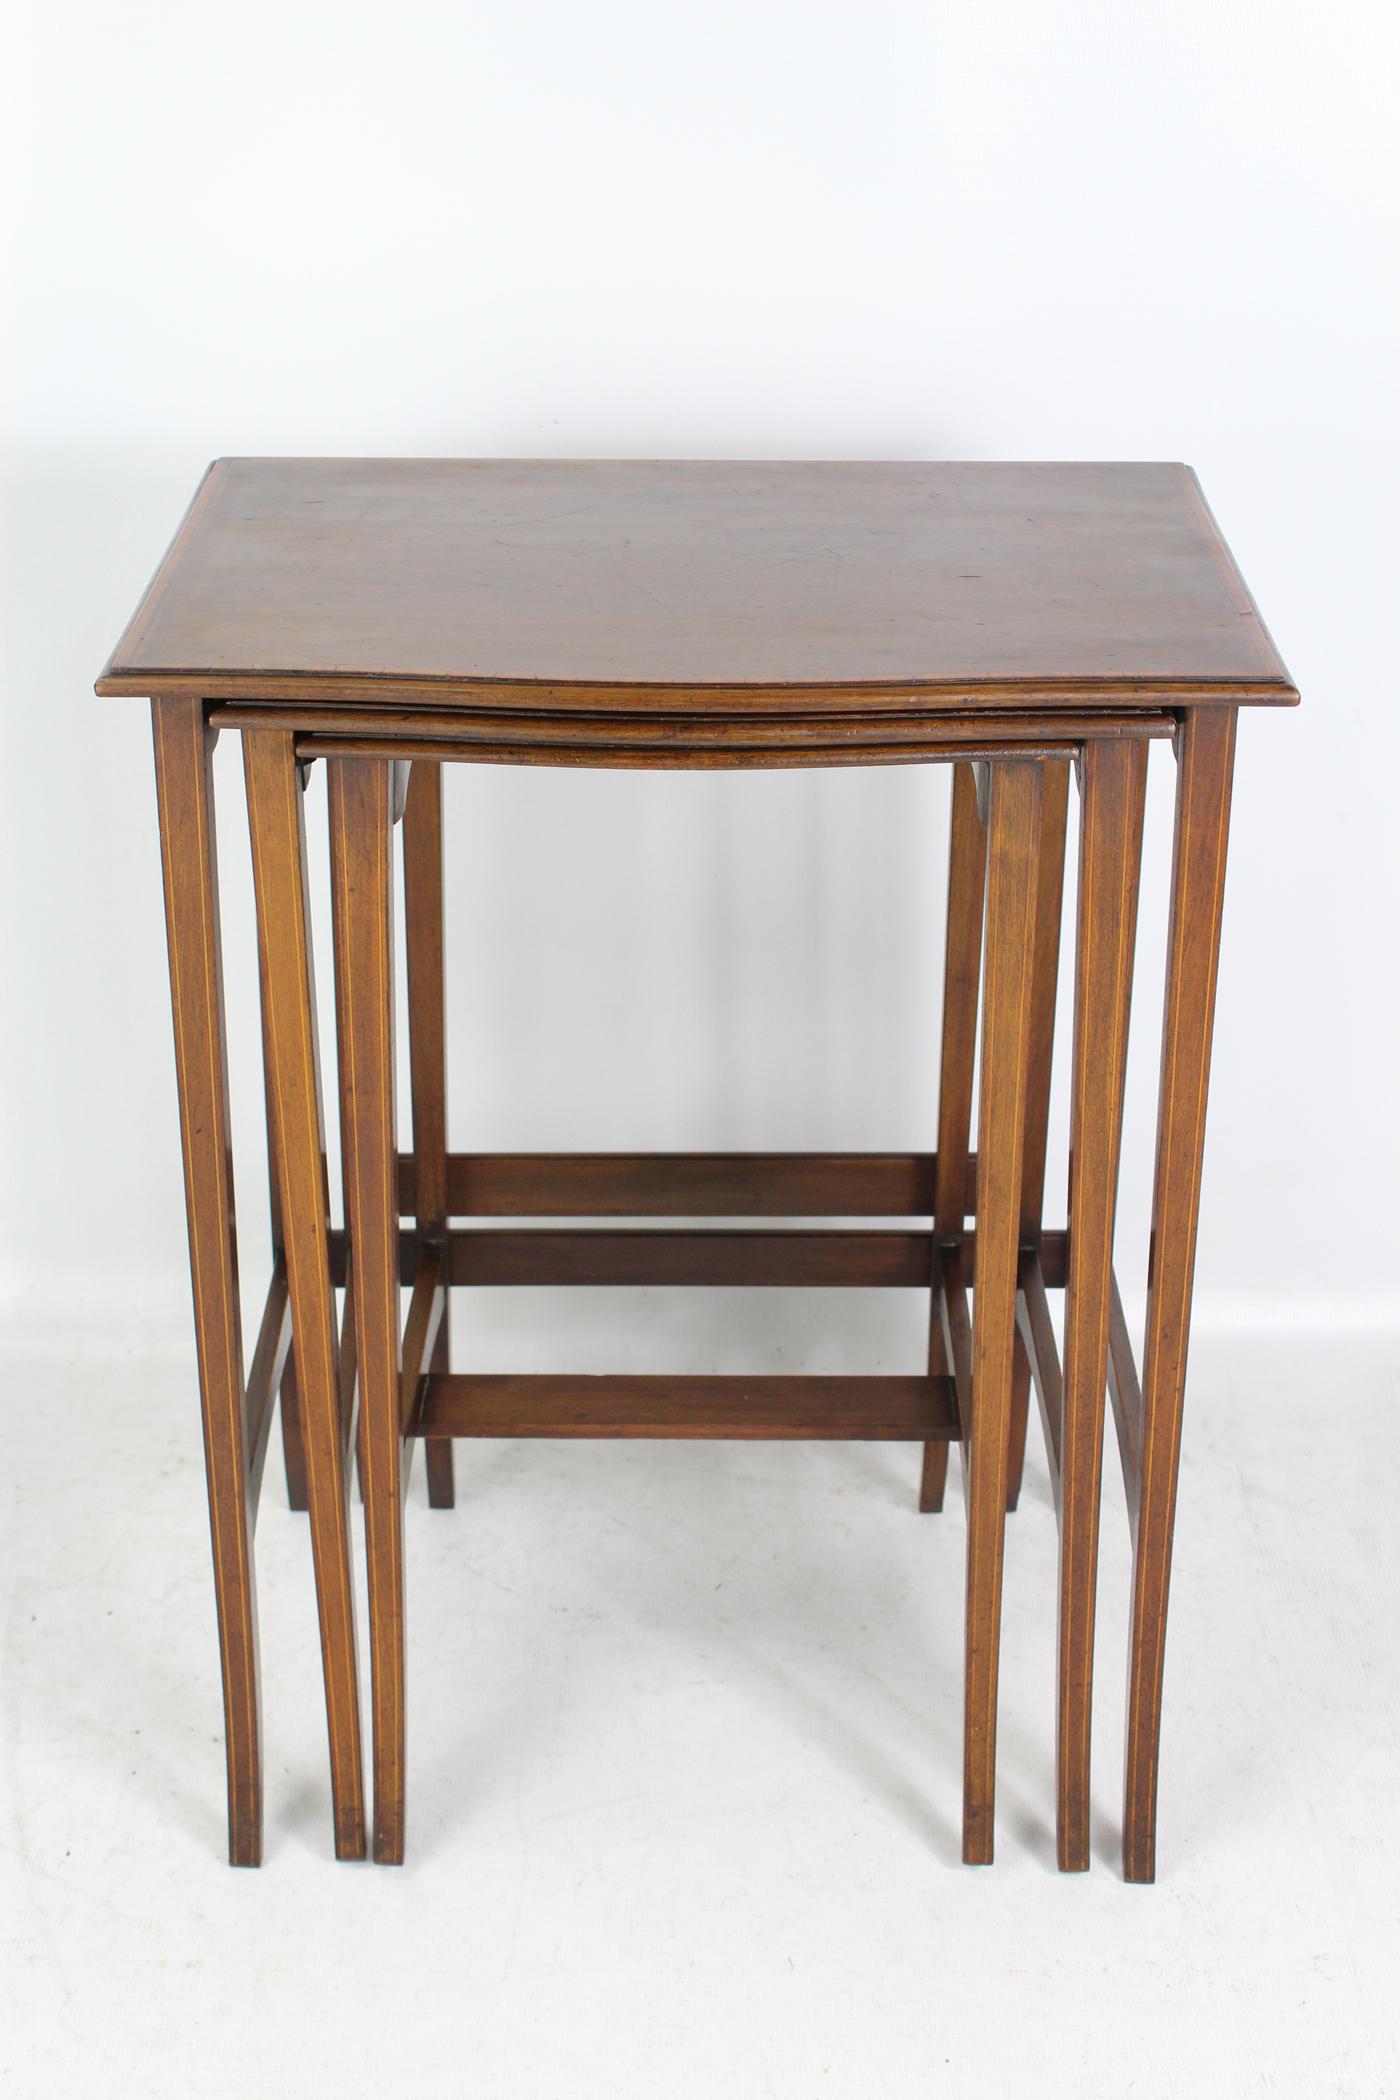 A charming antique Edwardian nest of 3 tables in mahogany with satinwood crossbanding dating from circa 1905. With rectangular tops, they stand on slender tapered legs with satinwood stringing. Solid and sturdy and in good condition.

